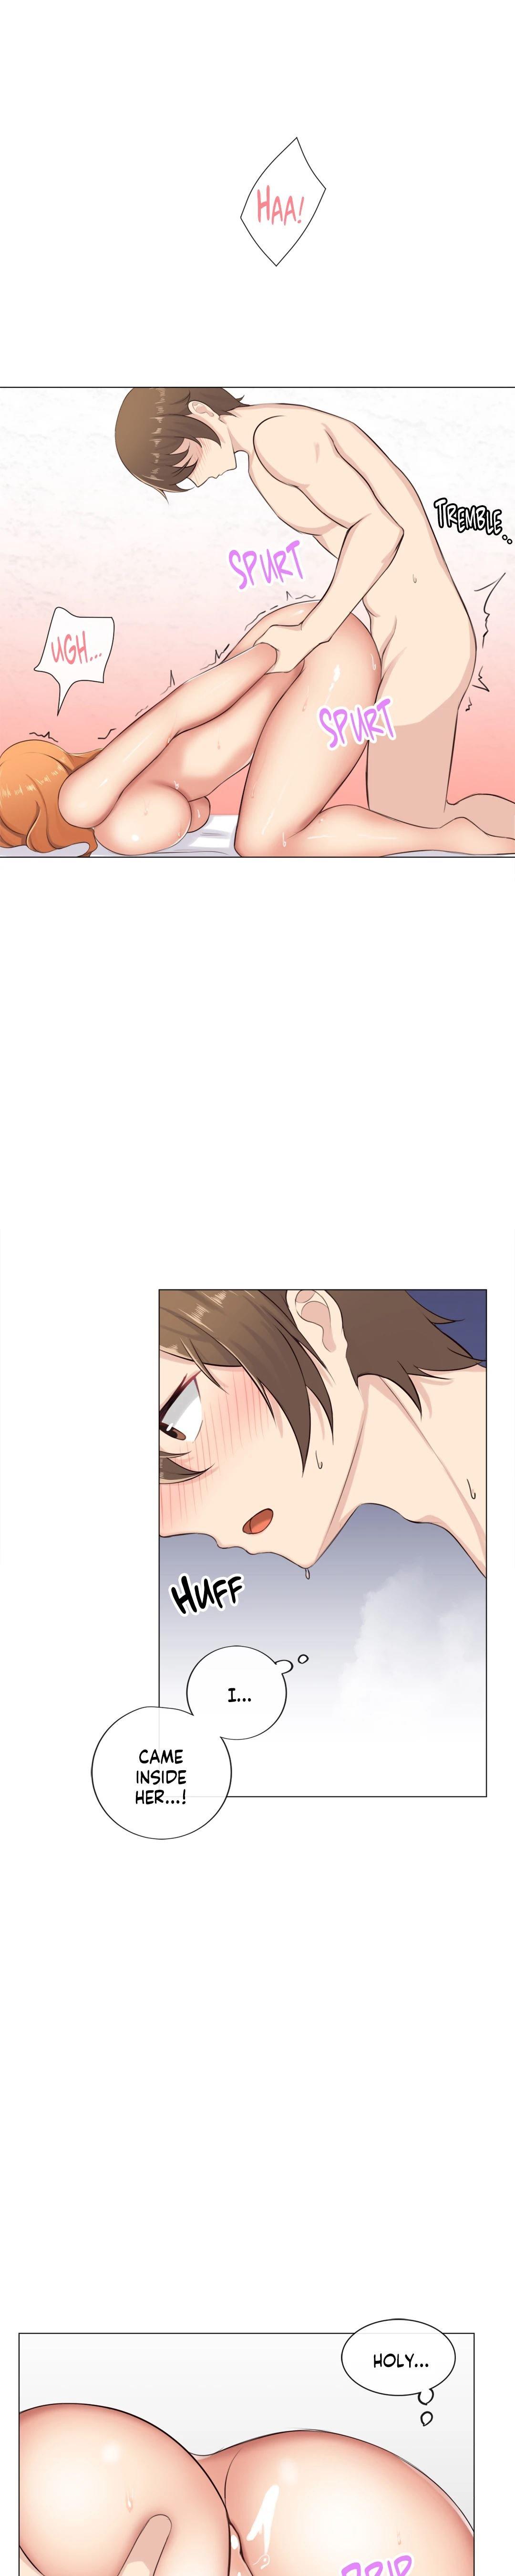 [Dumangoon, 130F] Sexcape Room: Pile Up Ch.9/9 [English] [Manhwa PDF] Completed 176